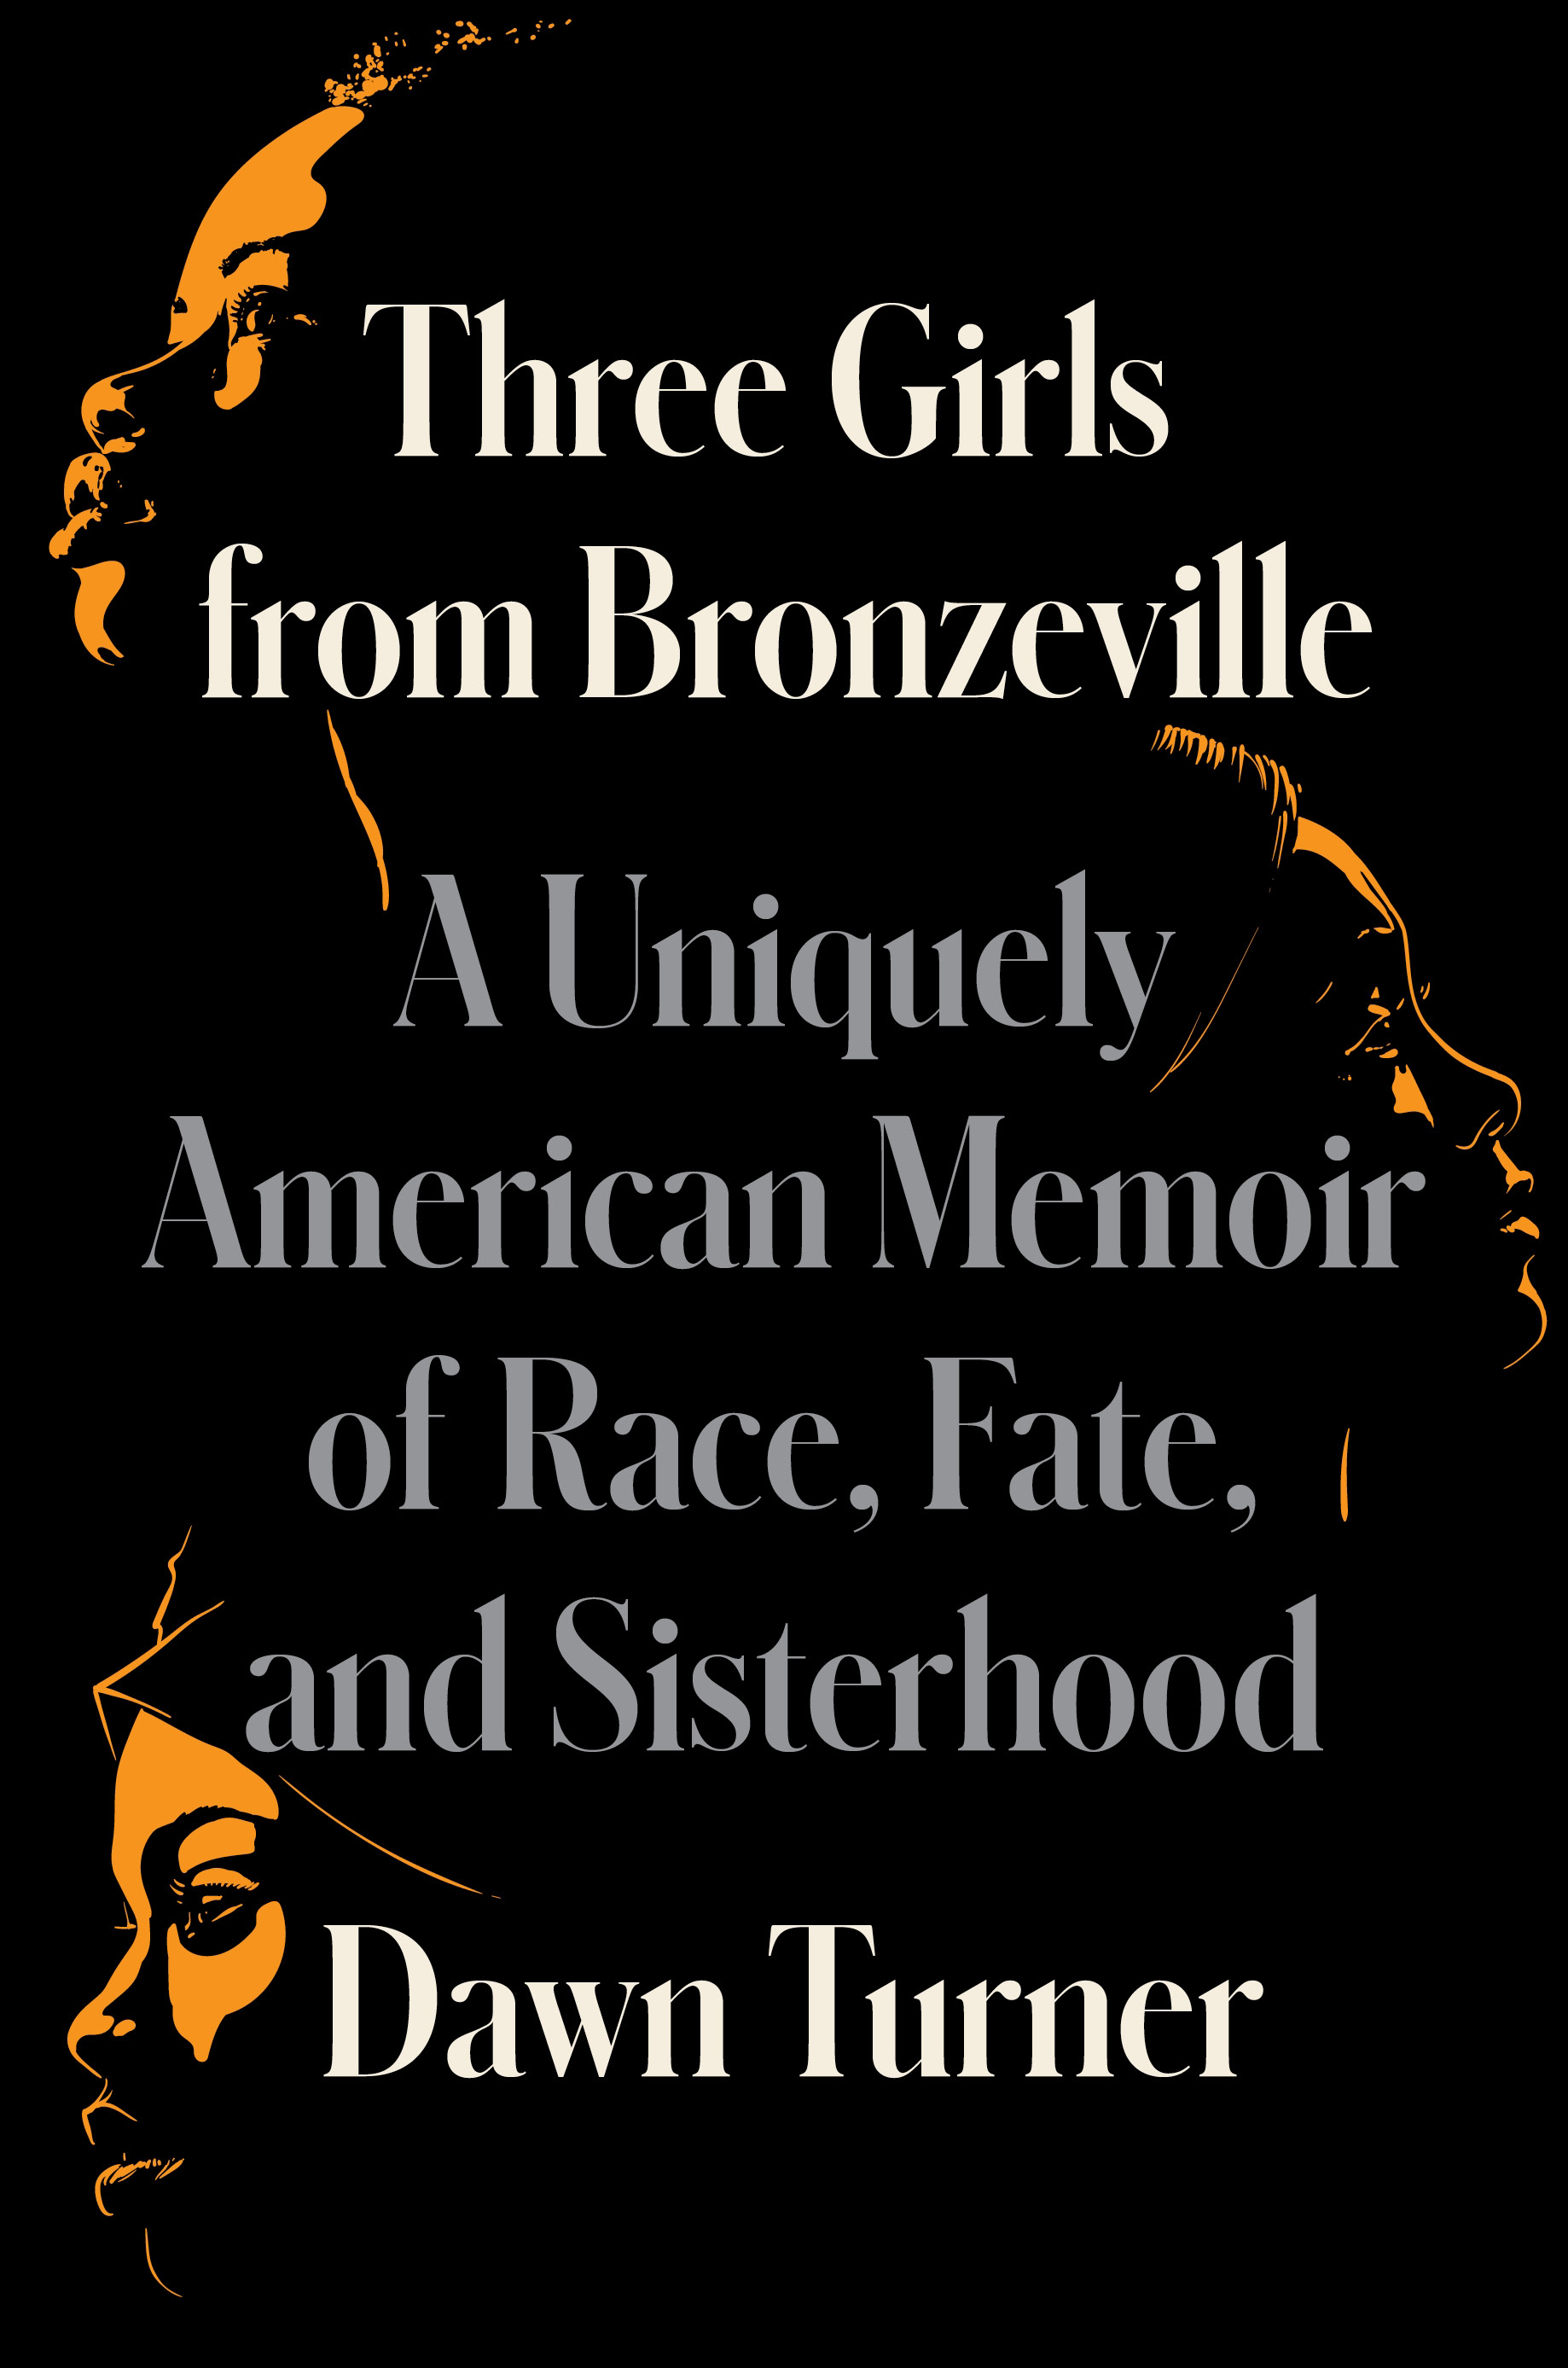 NDG Book Review: ‘Three Girls from Bronzeville’ is a warm read